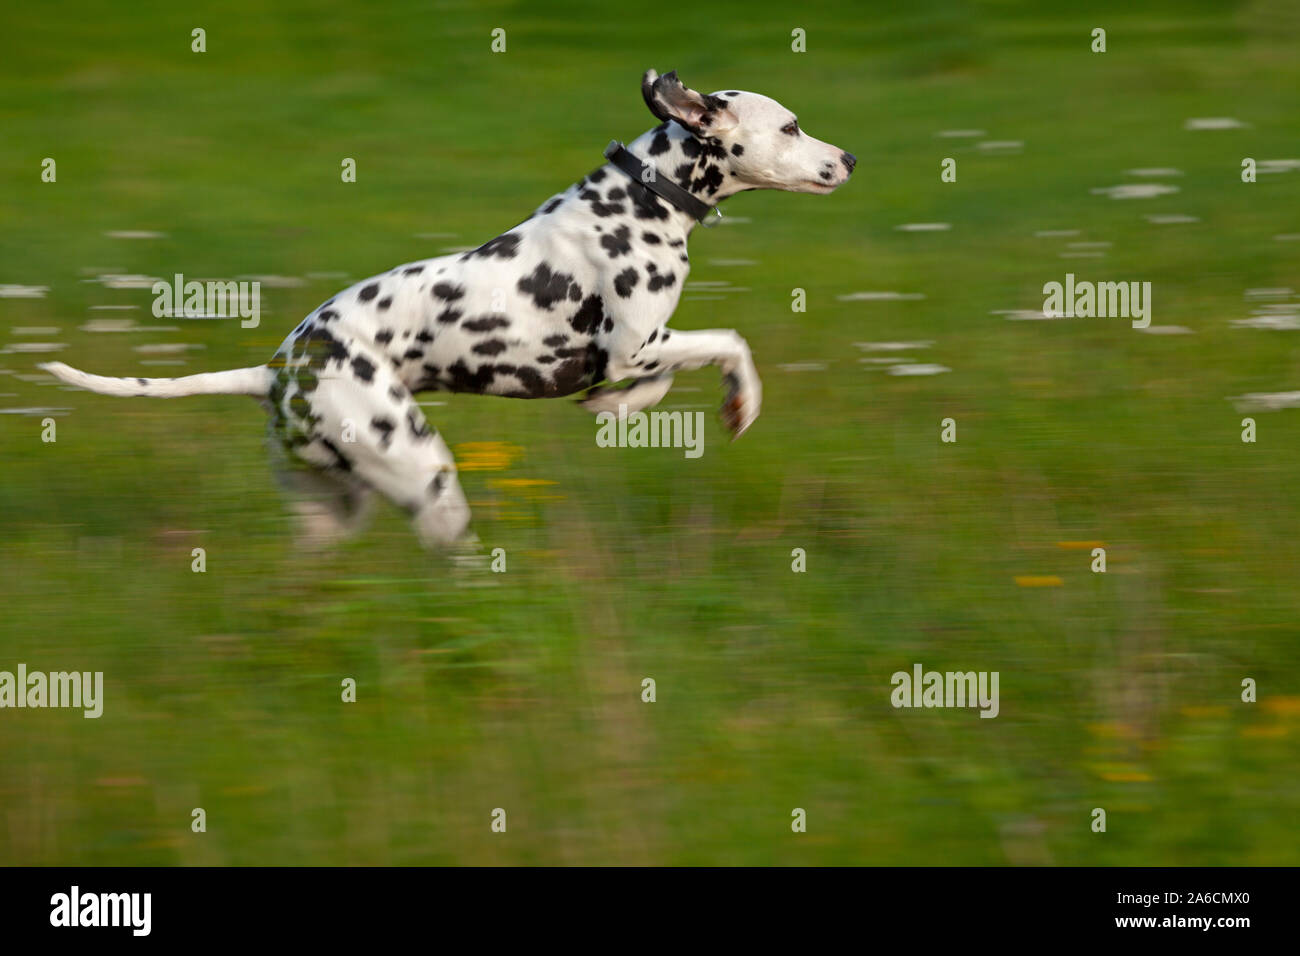 A Dalmatian is running across a meadow. Stock Photo